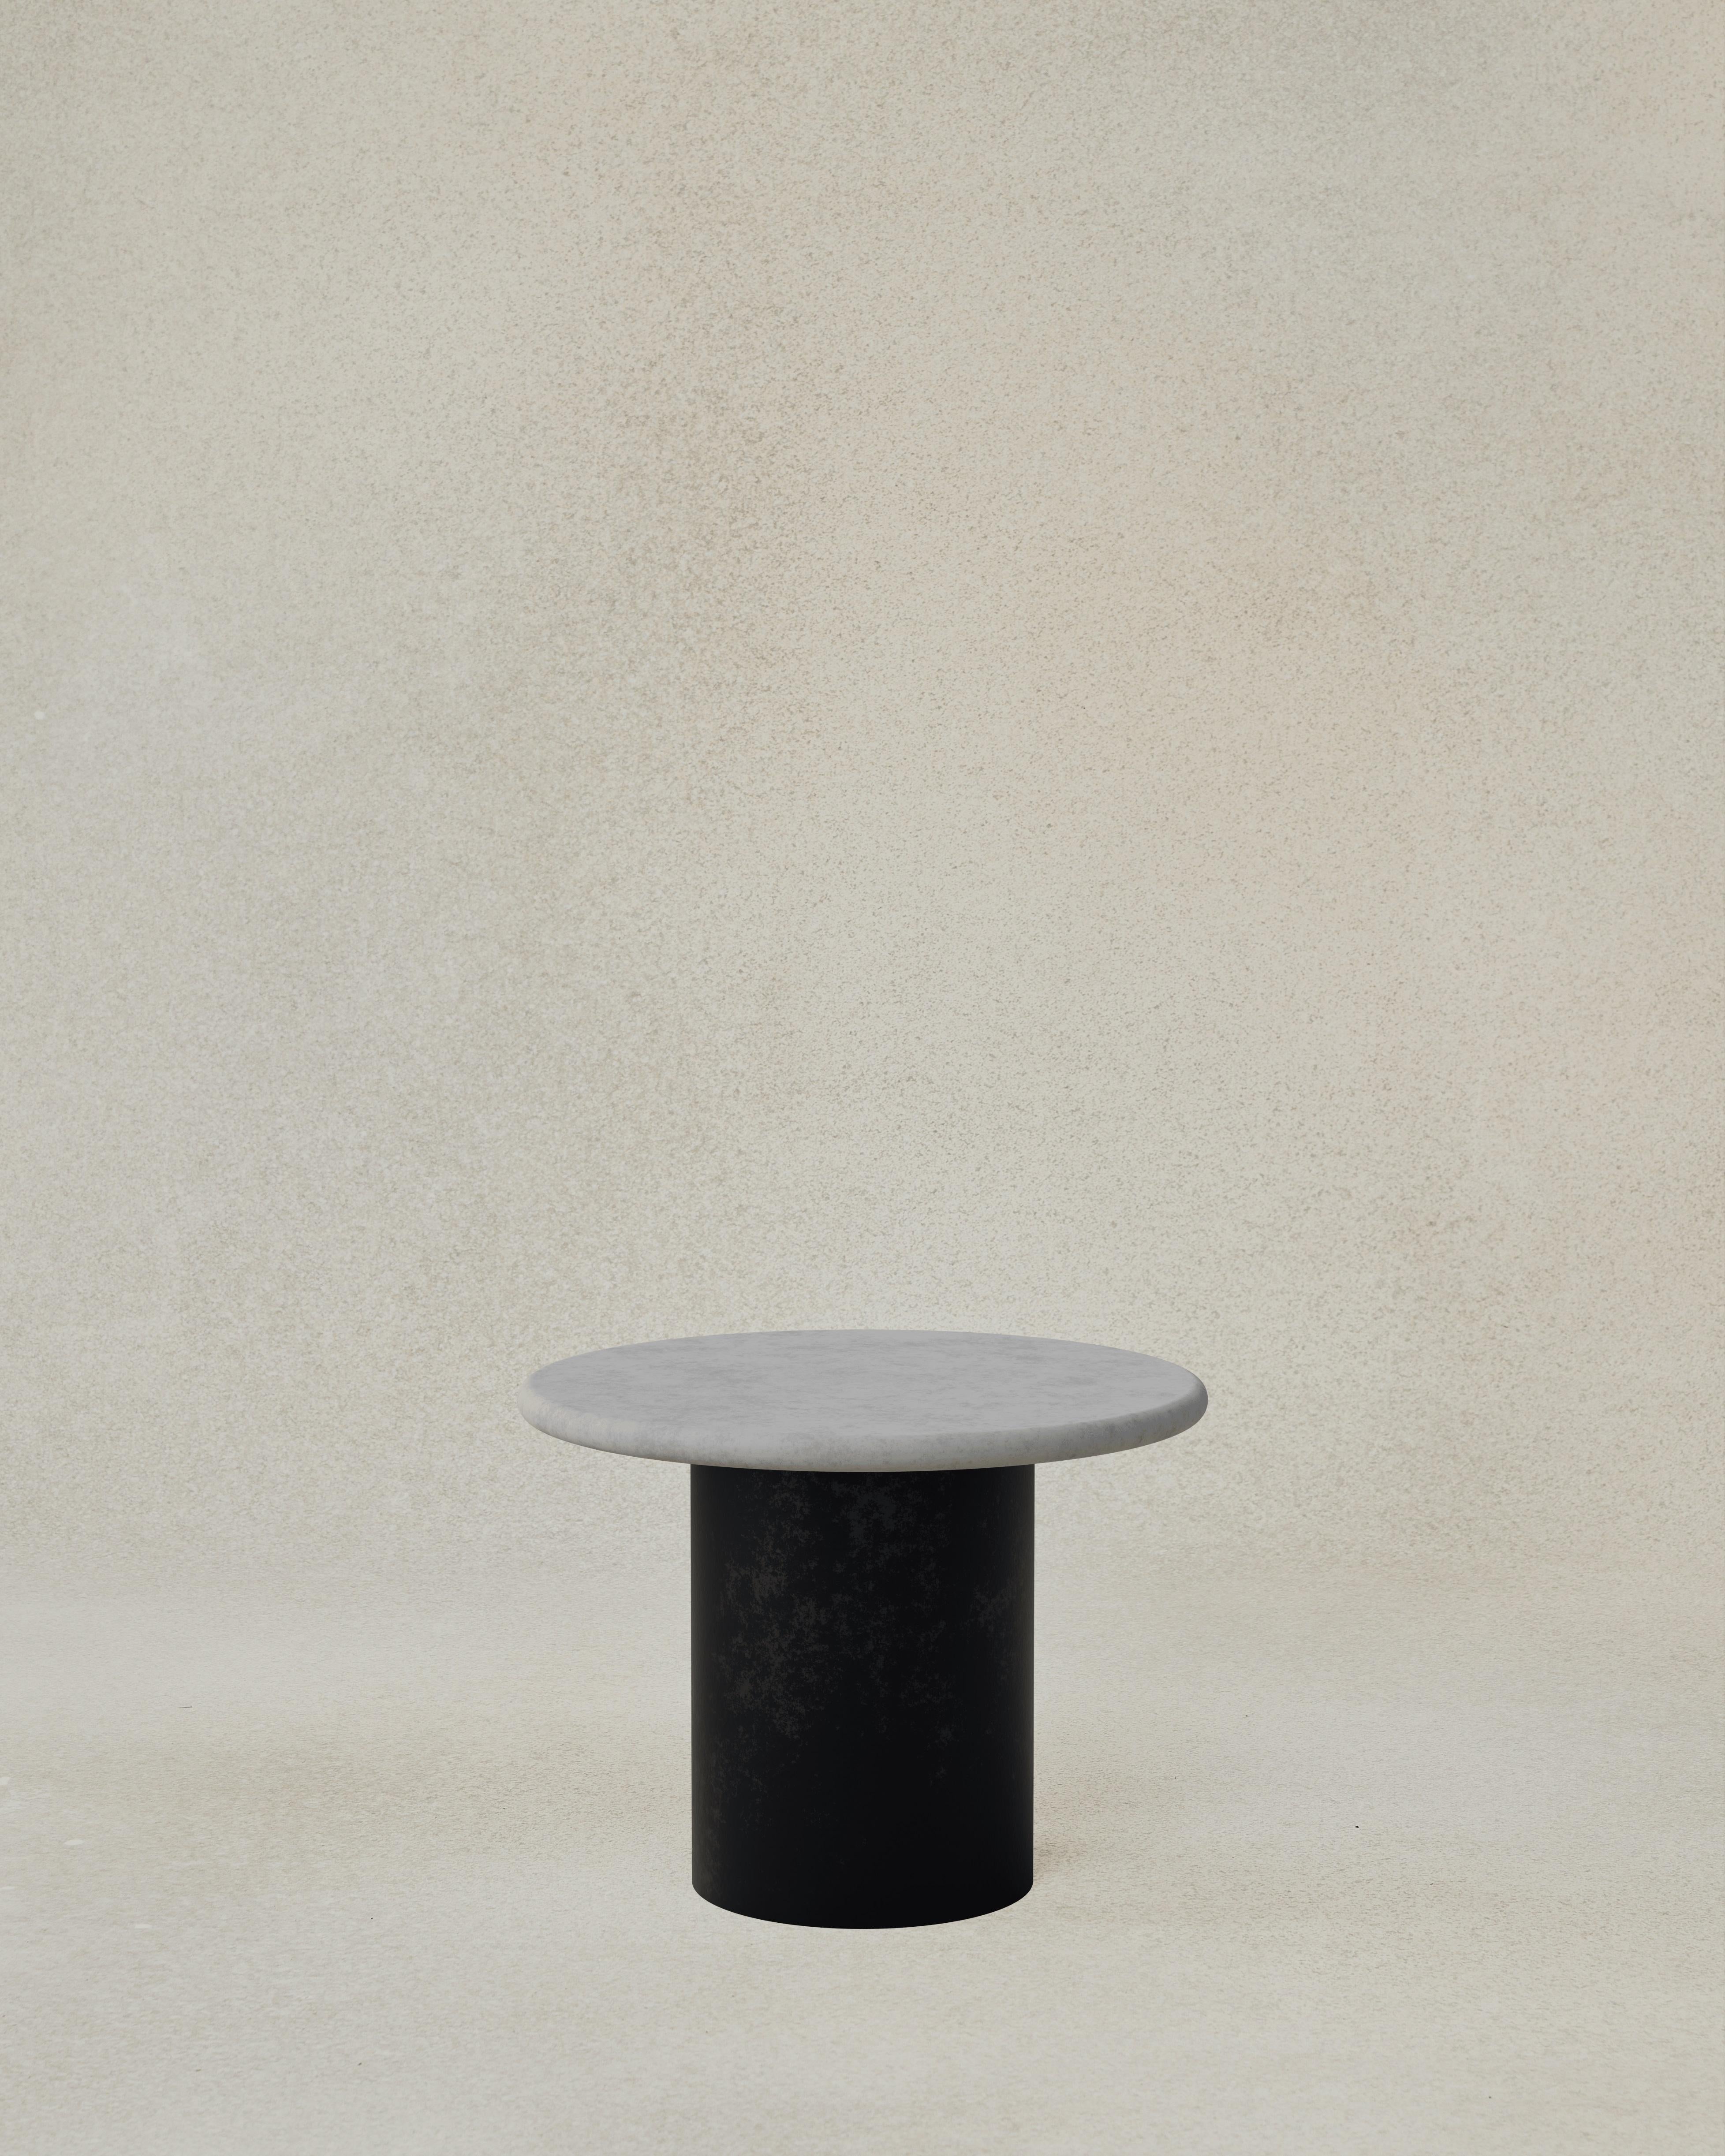 The Raindrop 500 is the largest side table we offer in the series can be paired with a 300 or 1000, or both! Now available in a range of finishes to suit any interior or style. The raindrops nestle together to form a cascading series of tables in